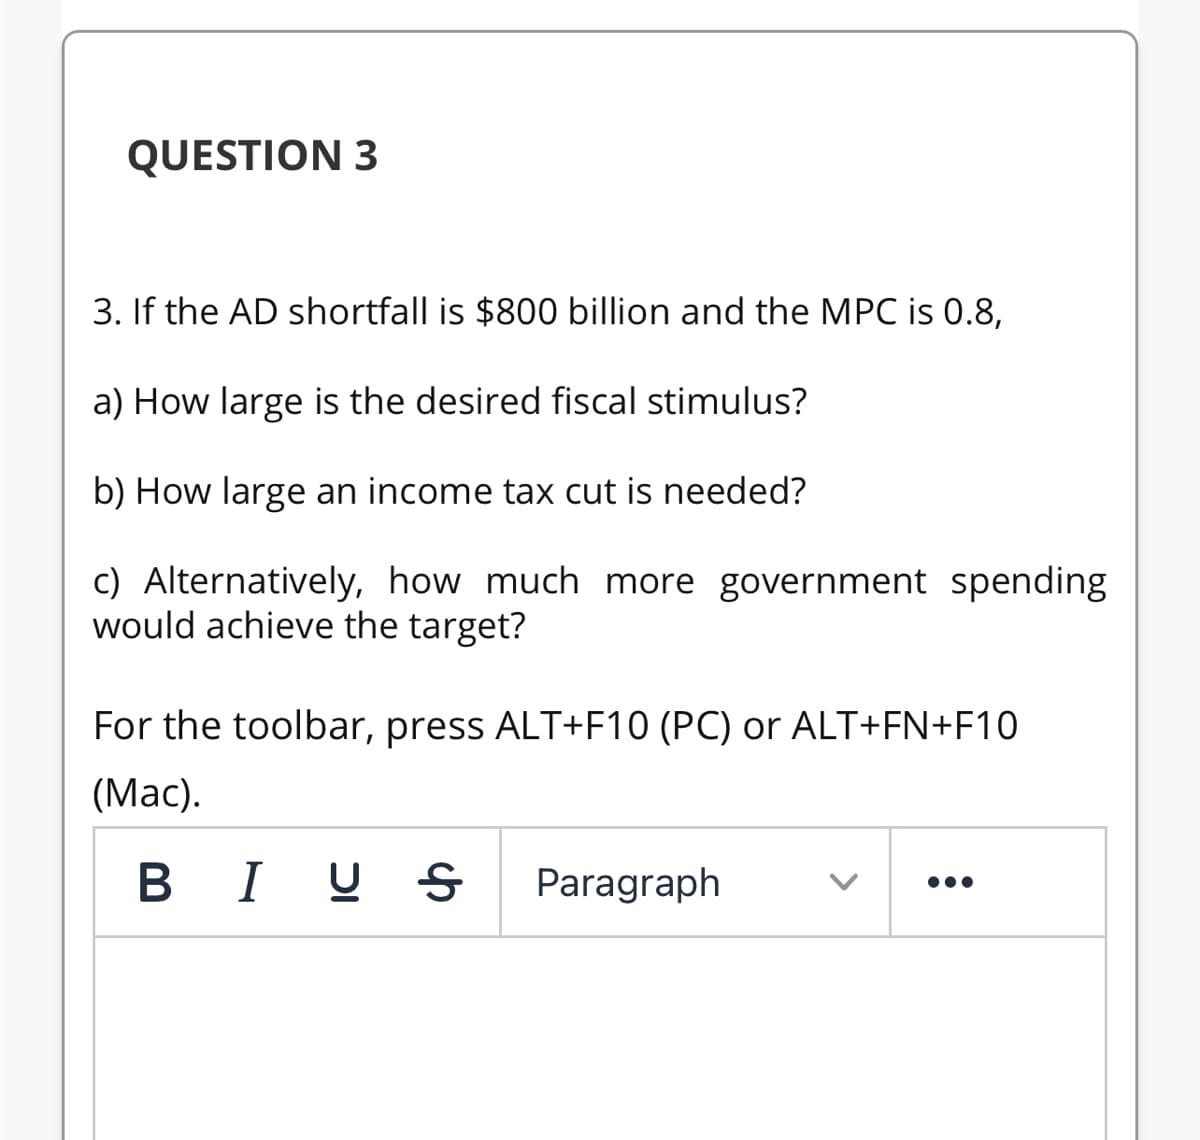 QUESTION 3
3. If the AD shortfall is $800 billion and the MPC is 0.8,
a) How large is the desired fiscal stimulus?
b) How large an income tax cut is needed?
c) Alternatively, how much more government spending
would achieve the target?
For the toolbar, press ALT+F10 (PC) or ALT+FN+F10
(Mac).
B I U S
Paragraph
